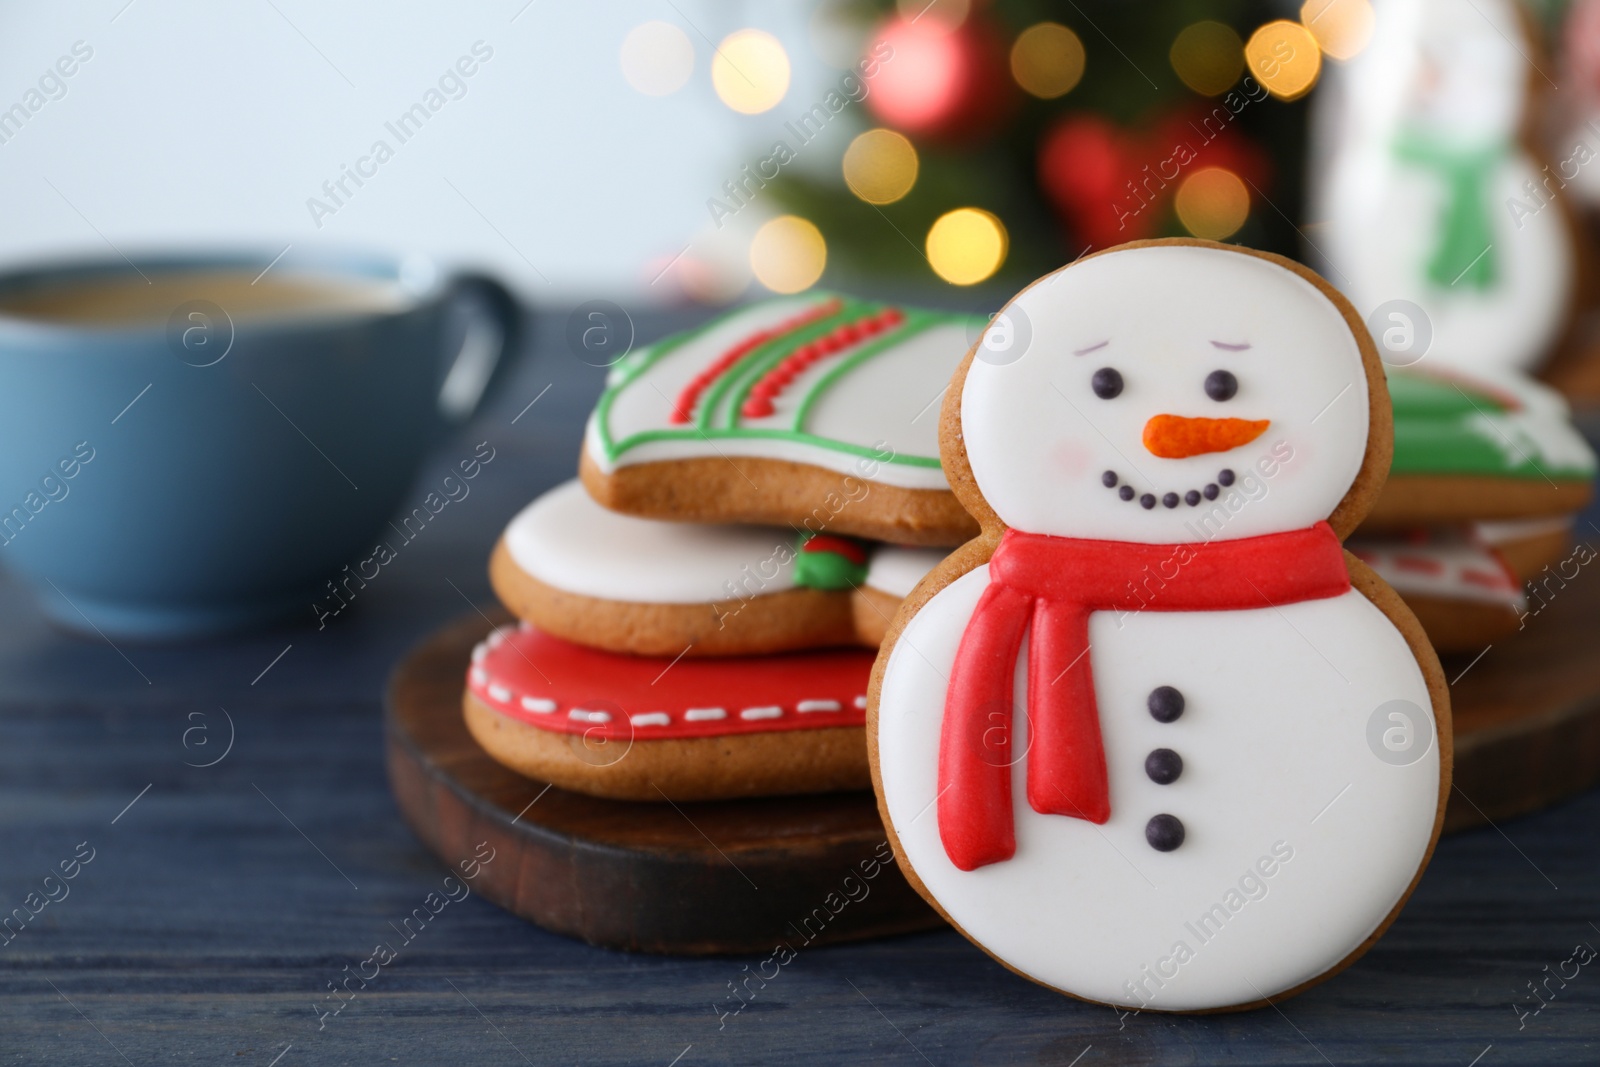 Photo of Decorated Christmas cookies on blue wooden table